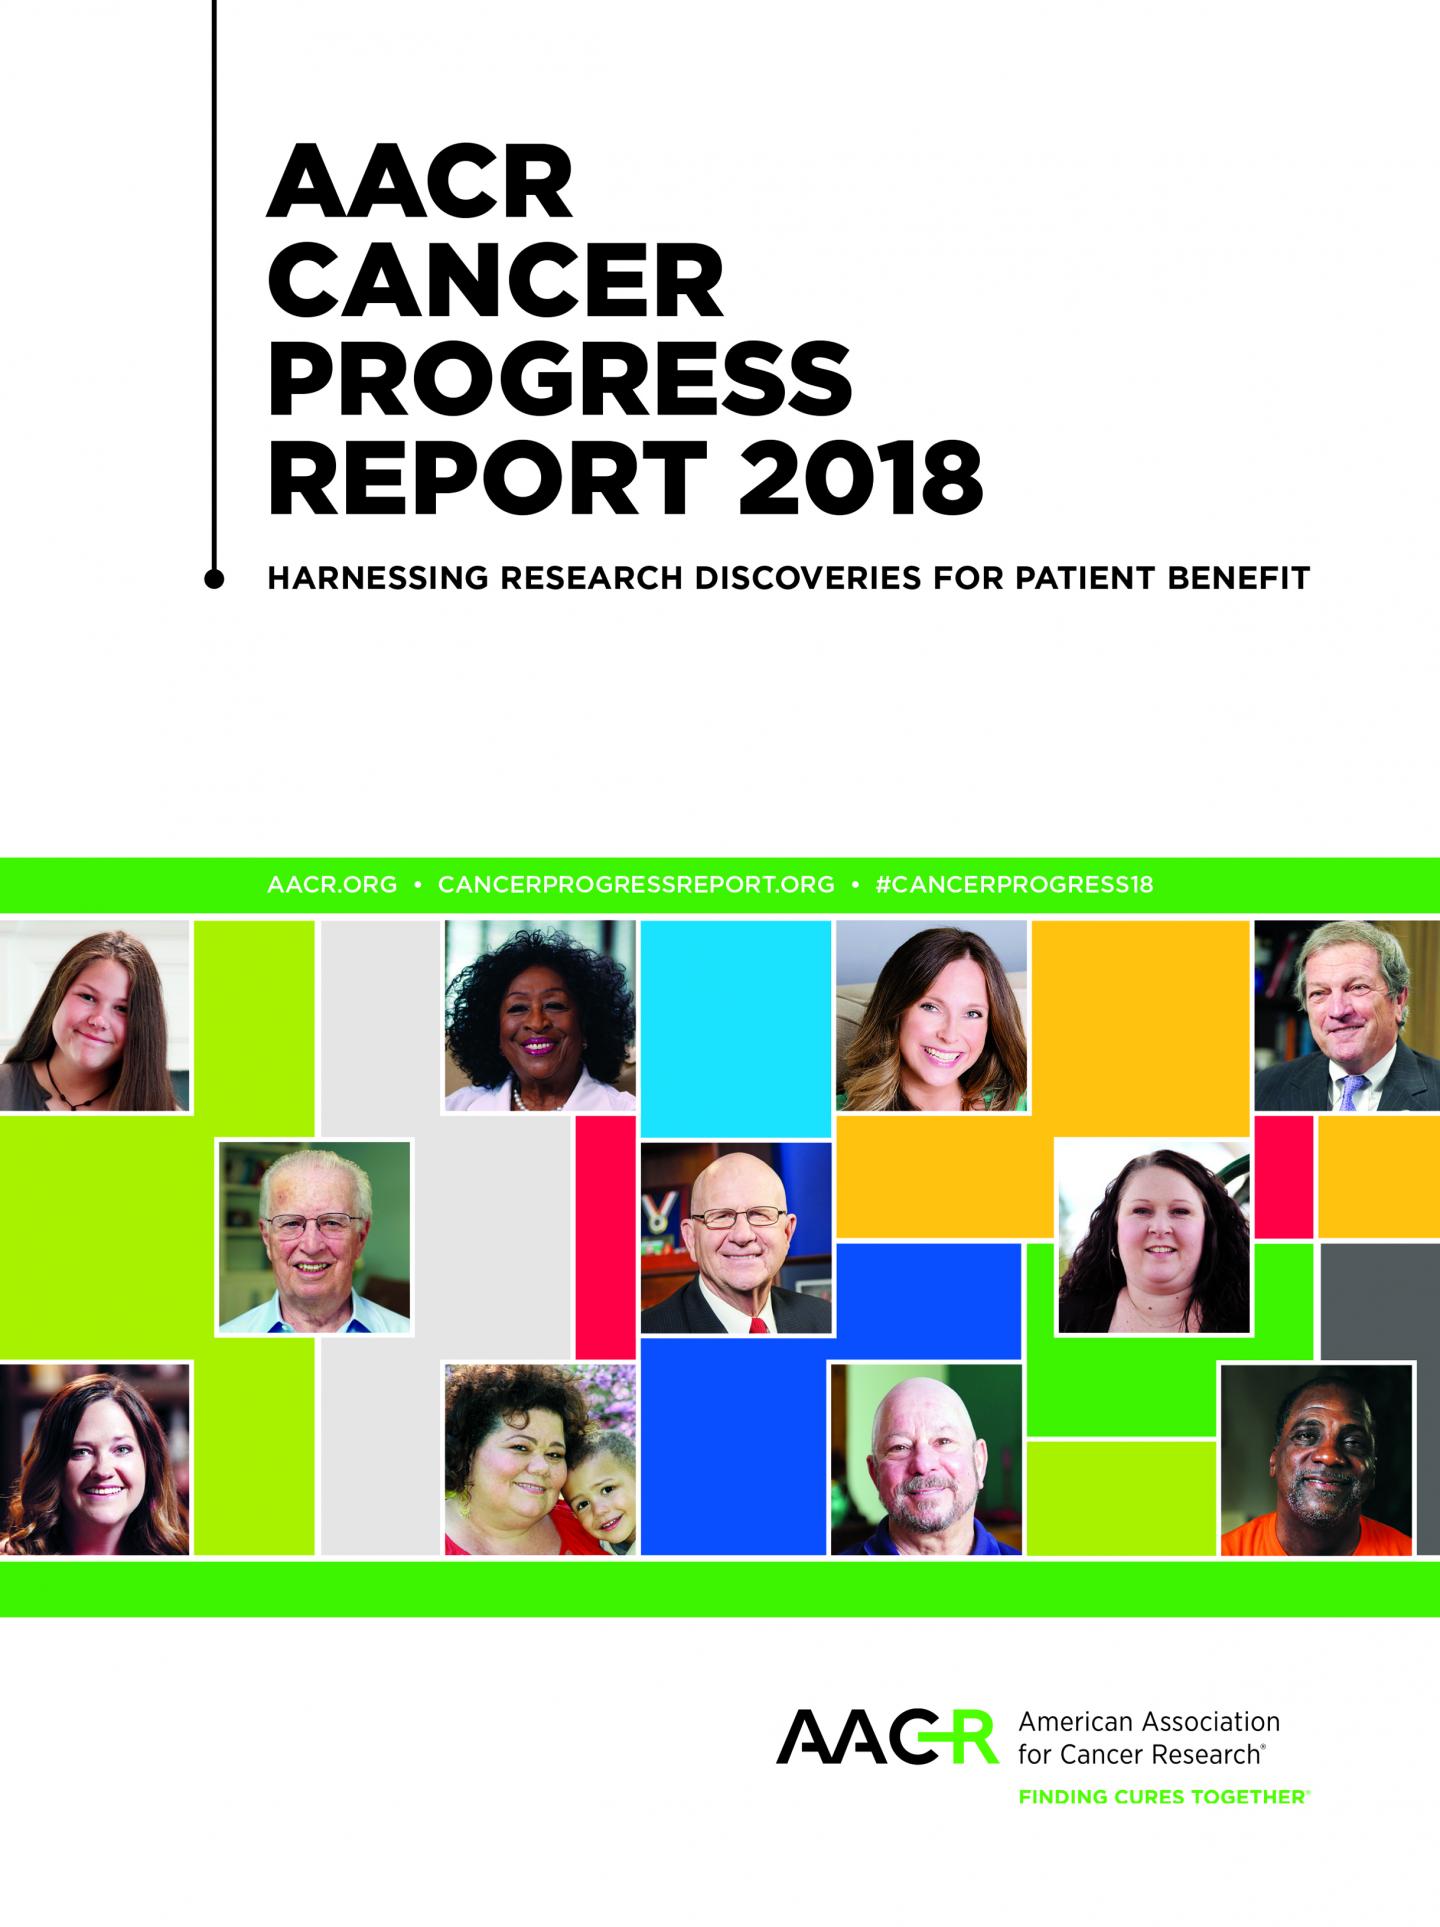 AACR Cancer Progress Report 2018